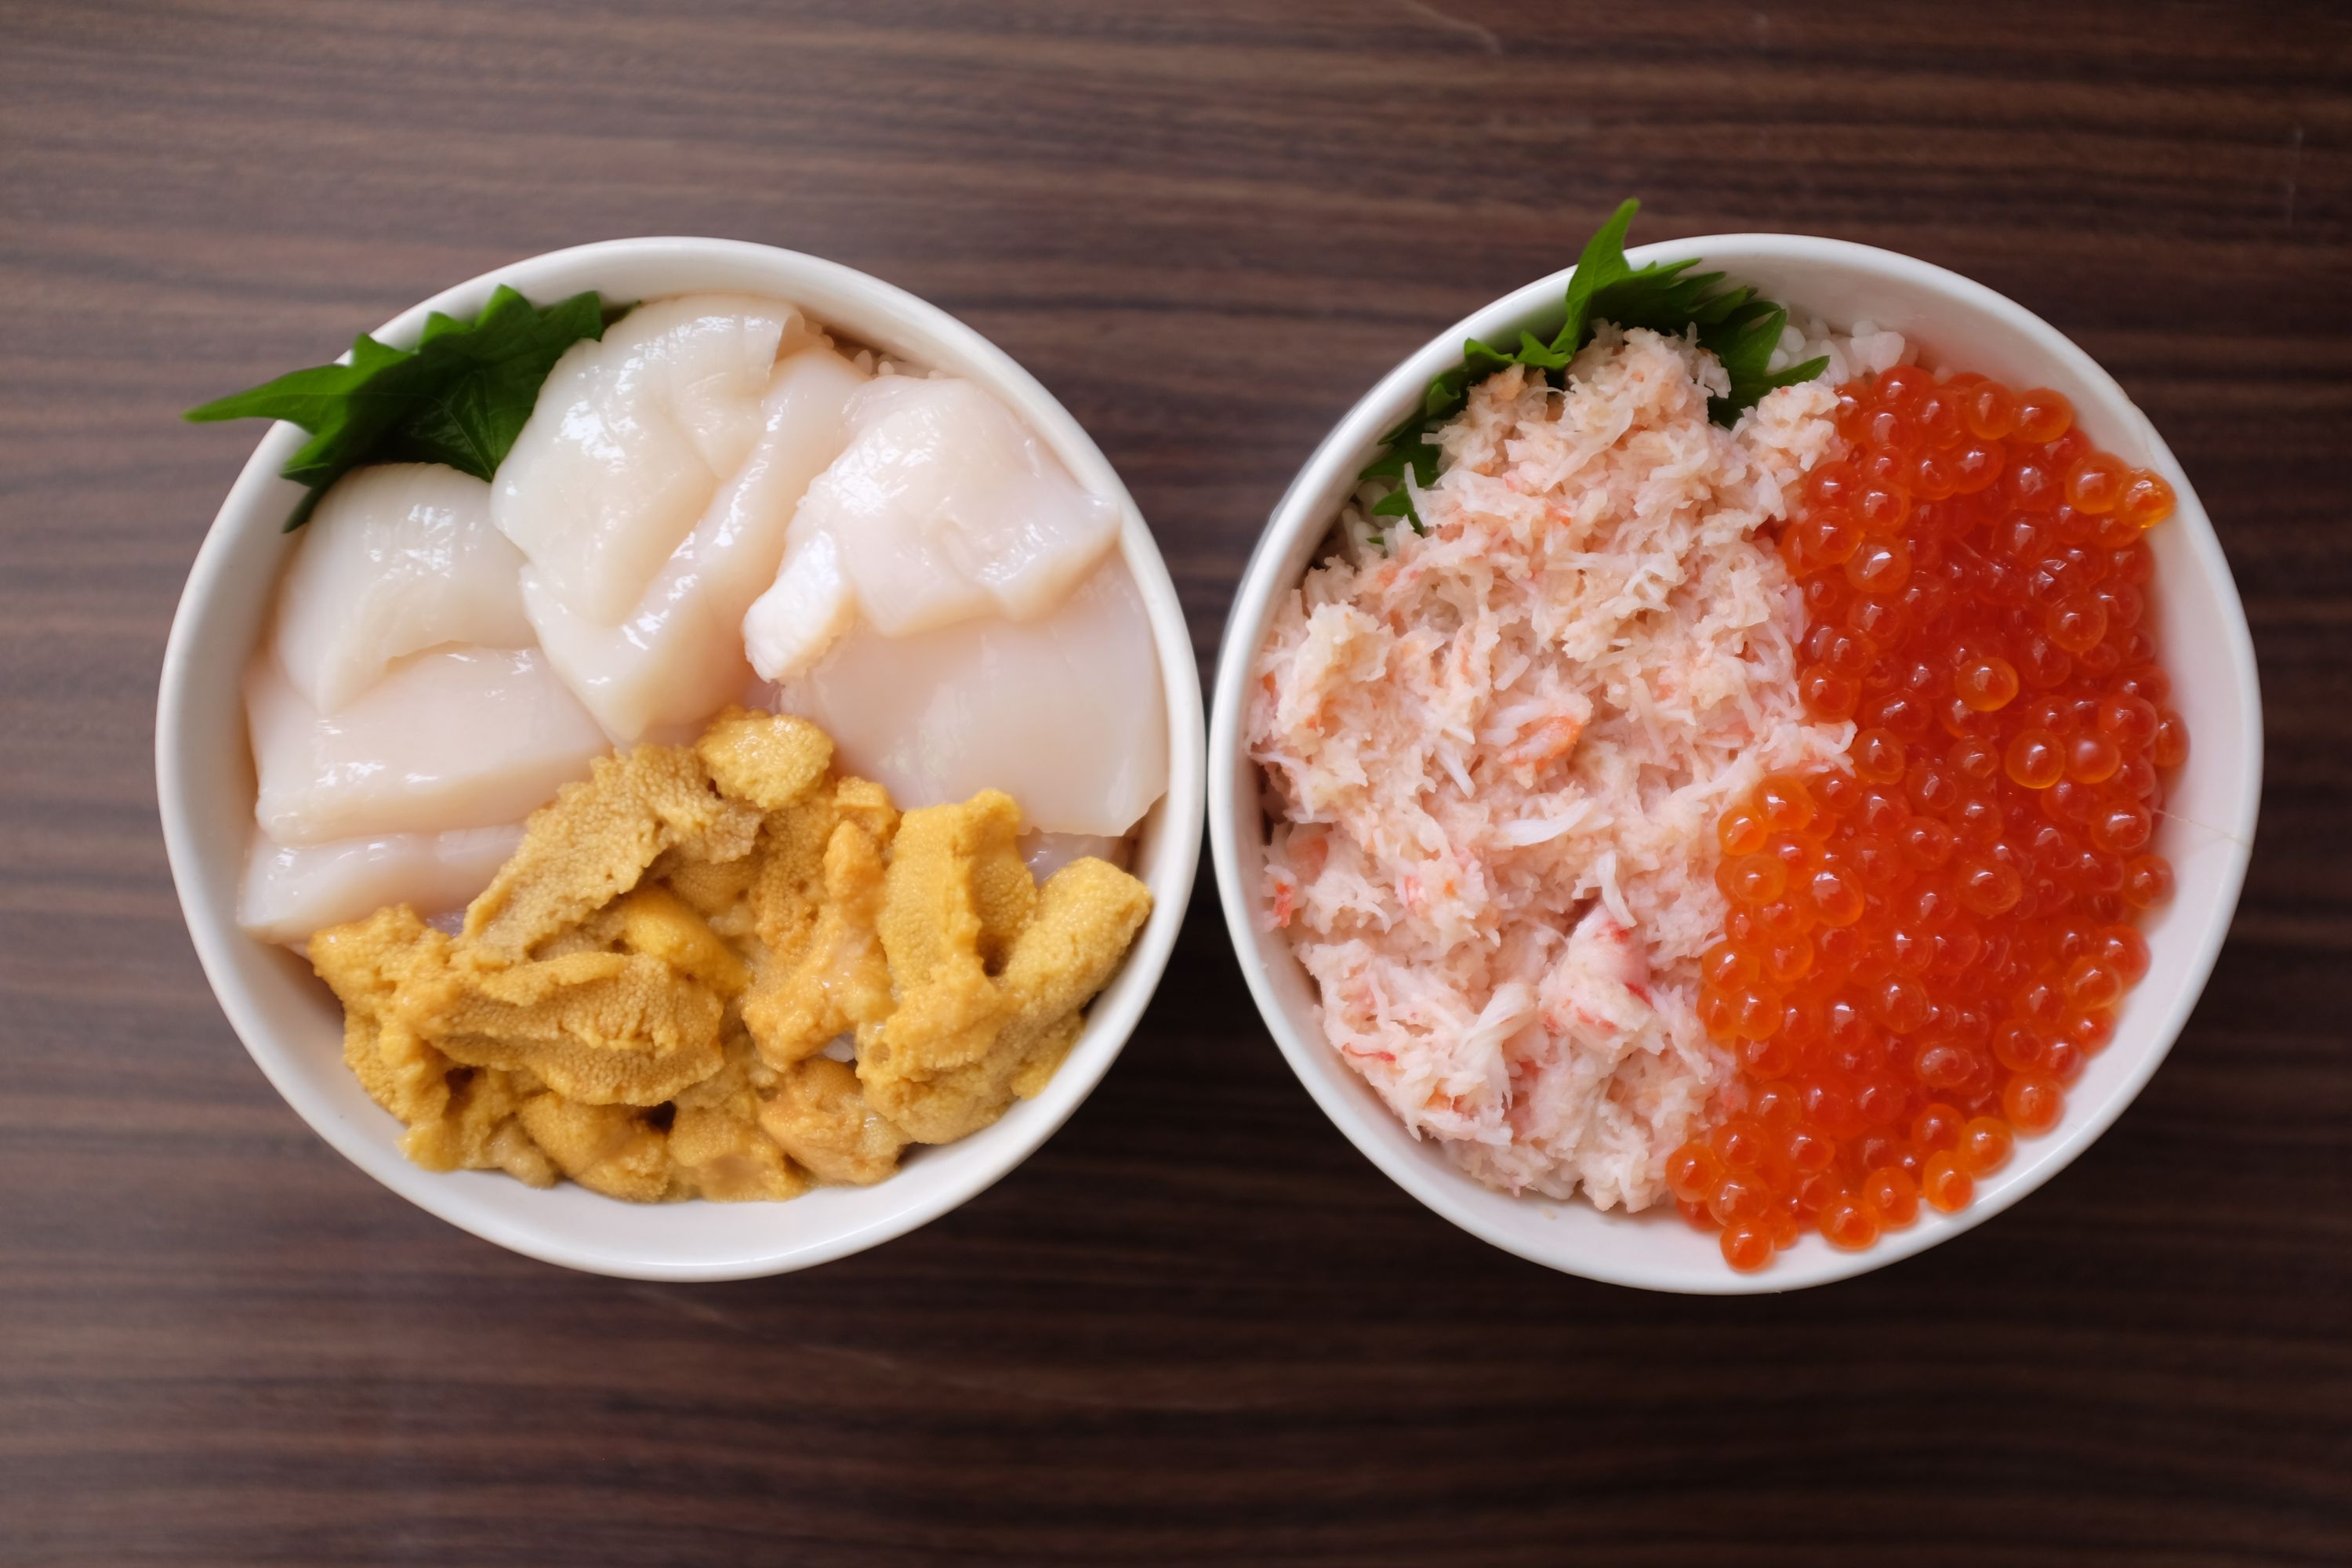 Two large bowls of seafood: scallops and sea urchin in one, crab meat and salmon roe in the other.